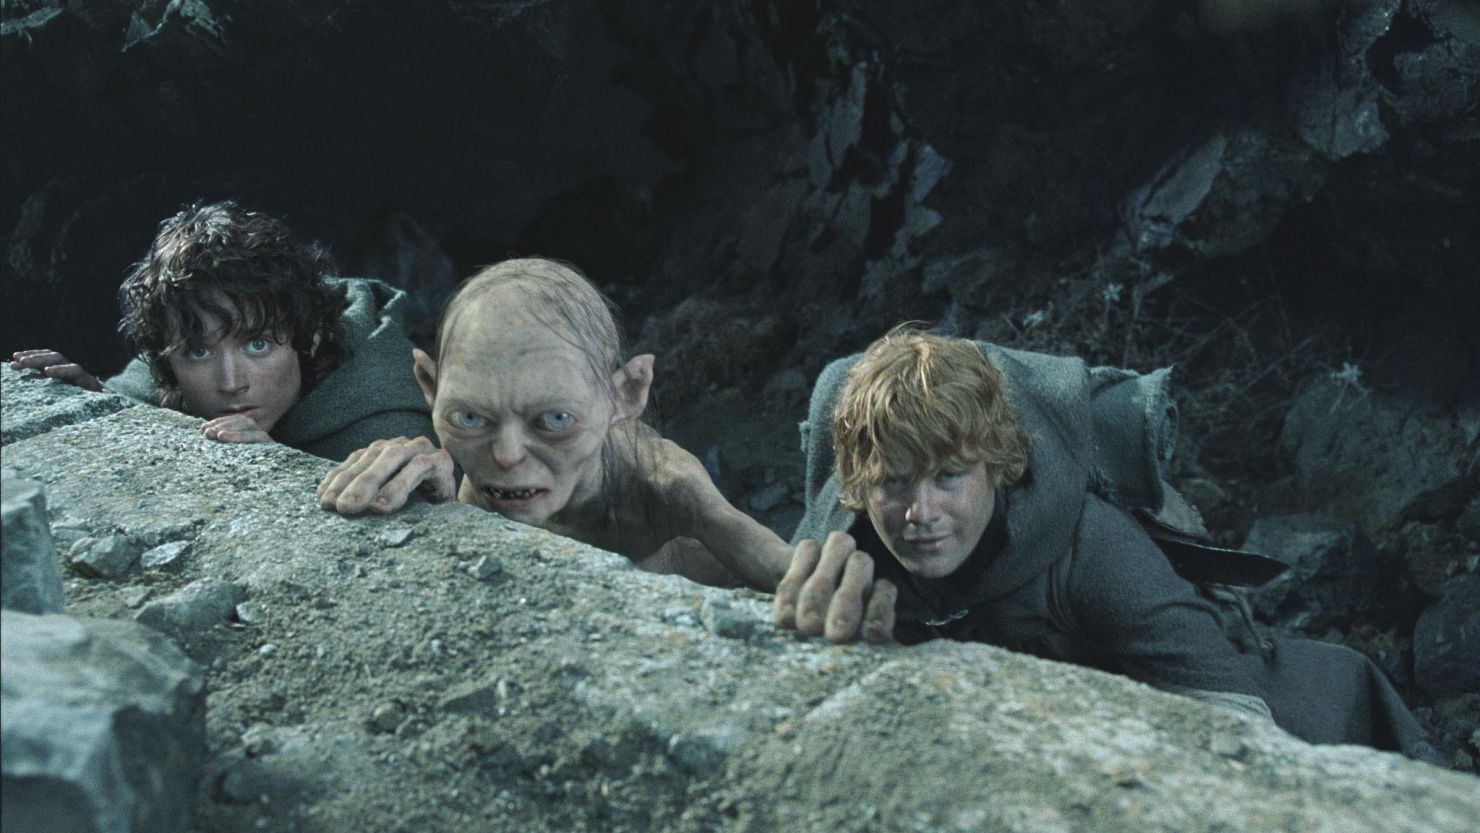 Elijah Wood, Andy Serkis, Sean Astin in "The Lord Of The Rings: The Return Of The King"